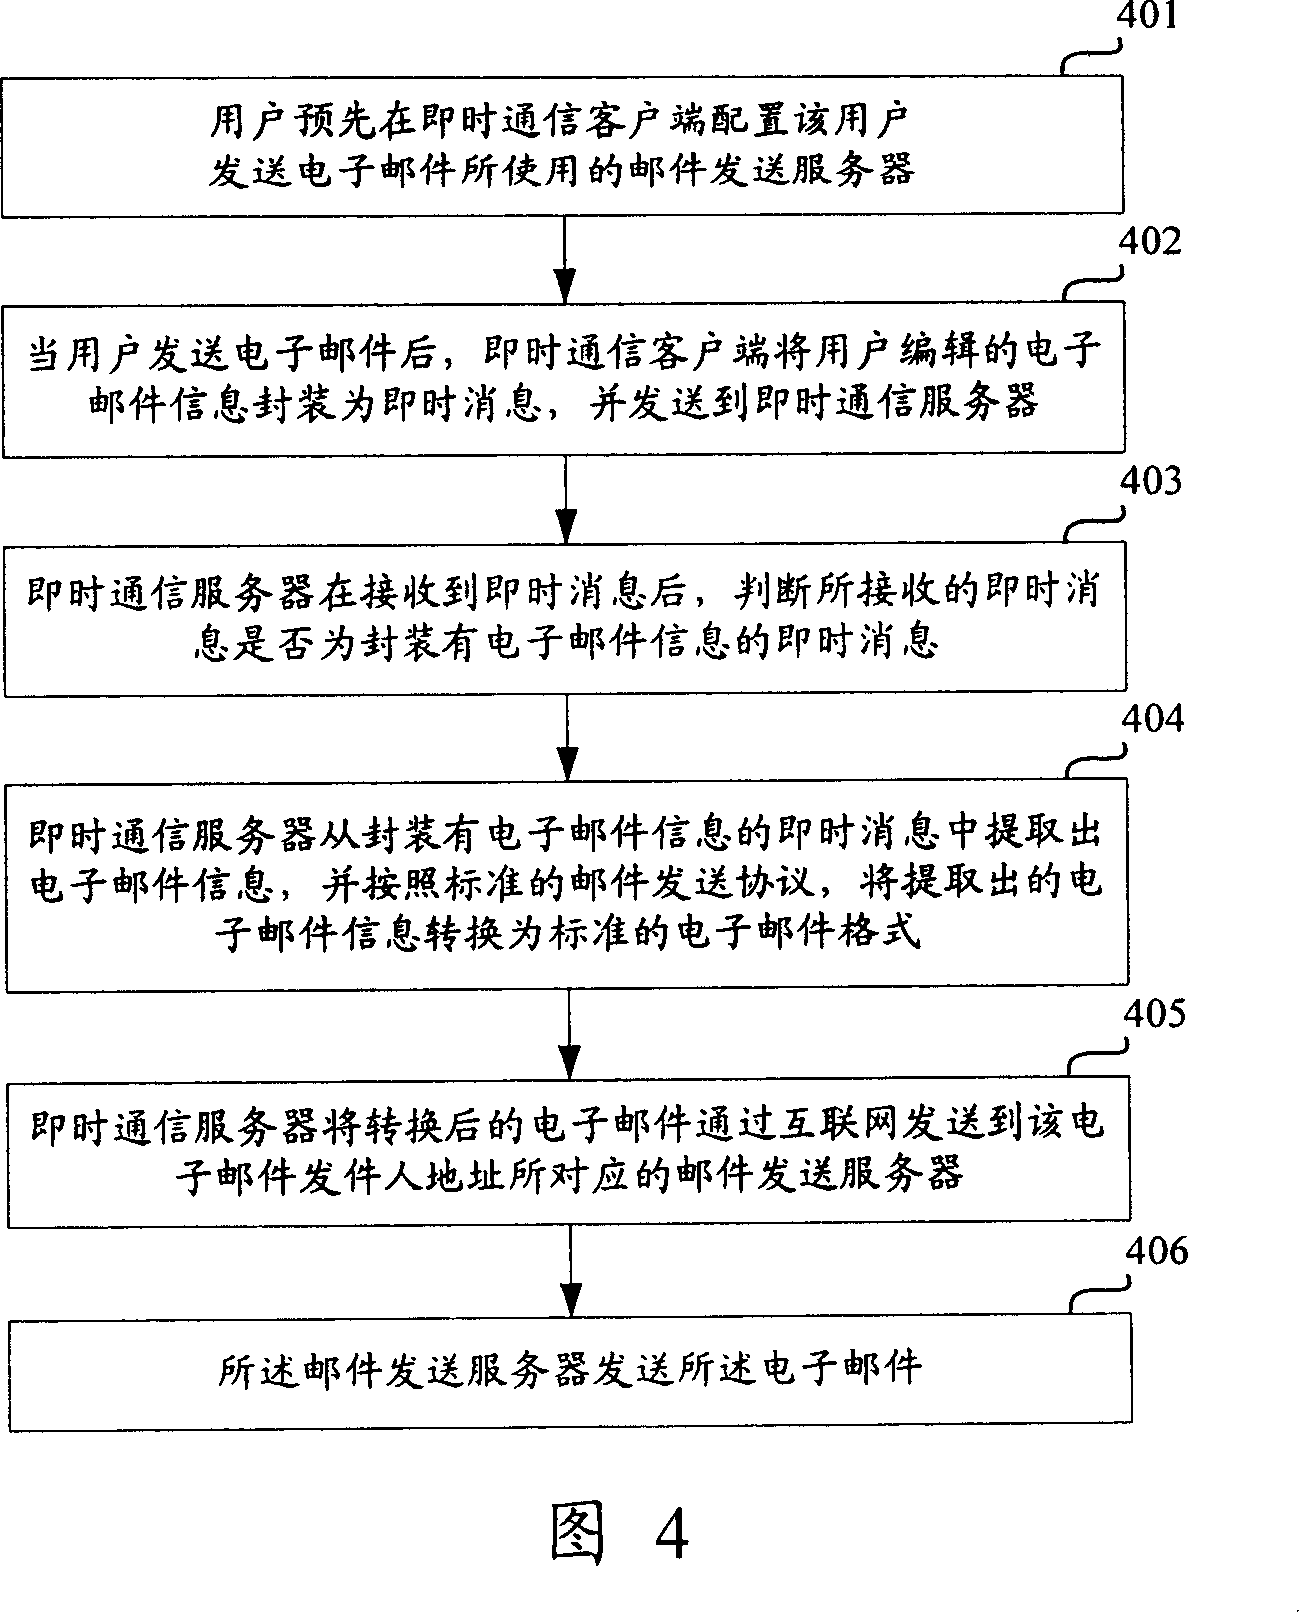 Instant communication system supporting email function and email sending and receiving method